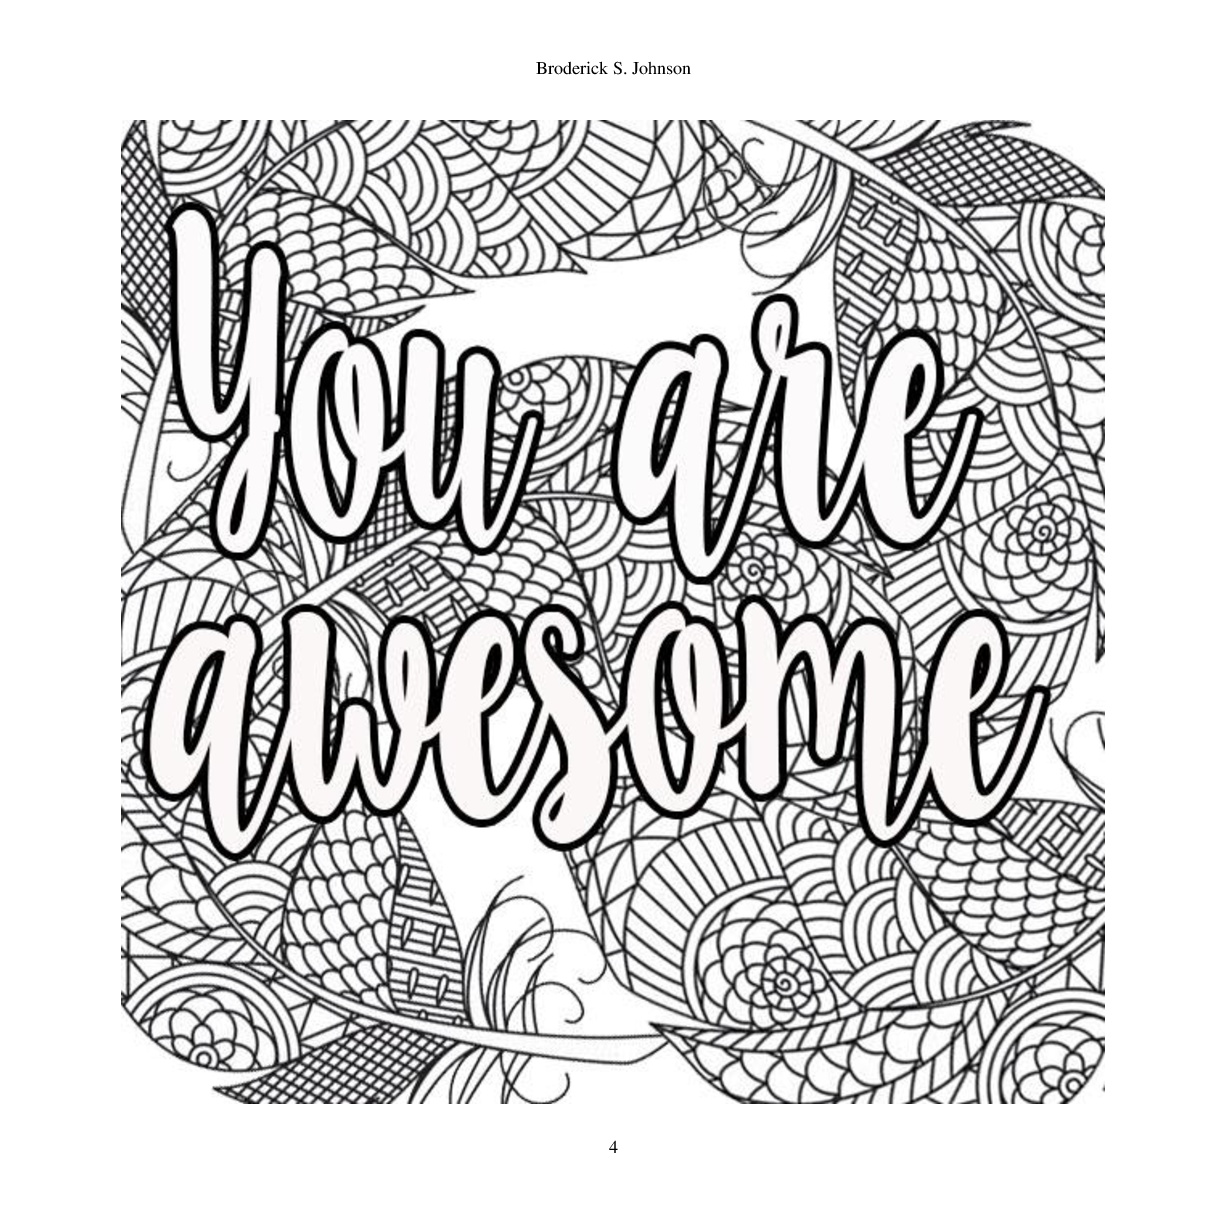 Motivational Coloring Pages For Adults at GetDrawings | Free download